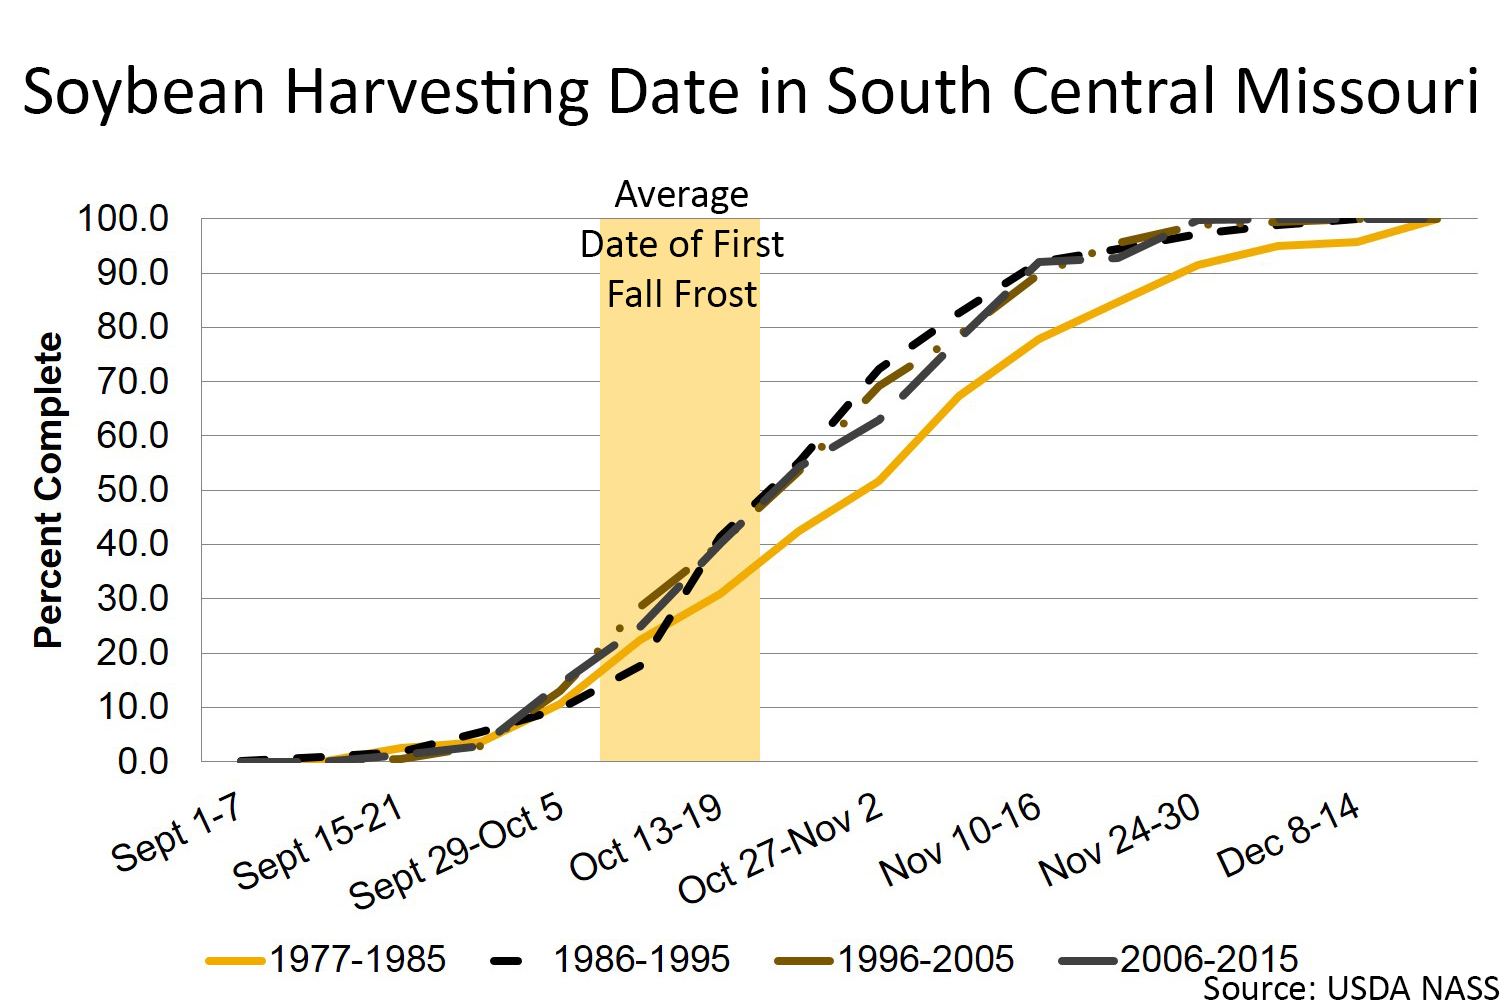 Soybean harvesting date in south central Missouri chart